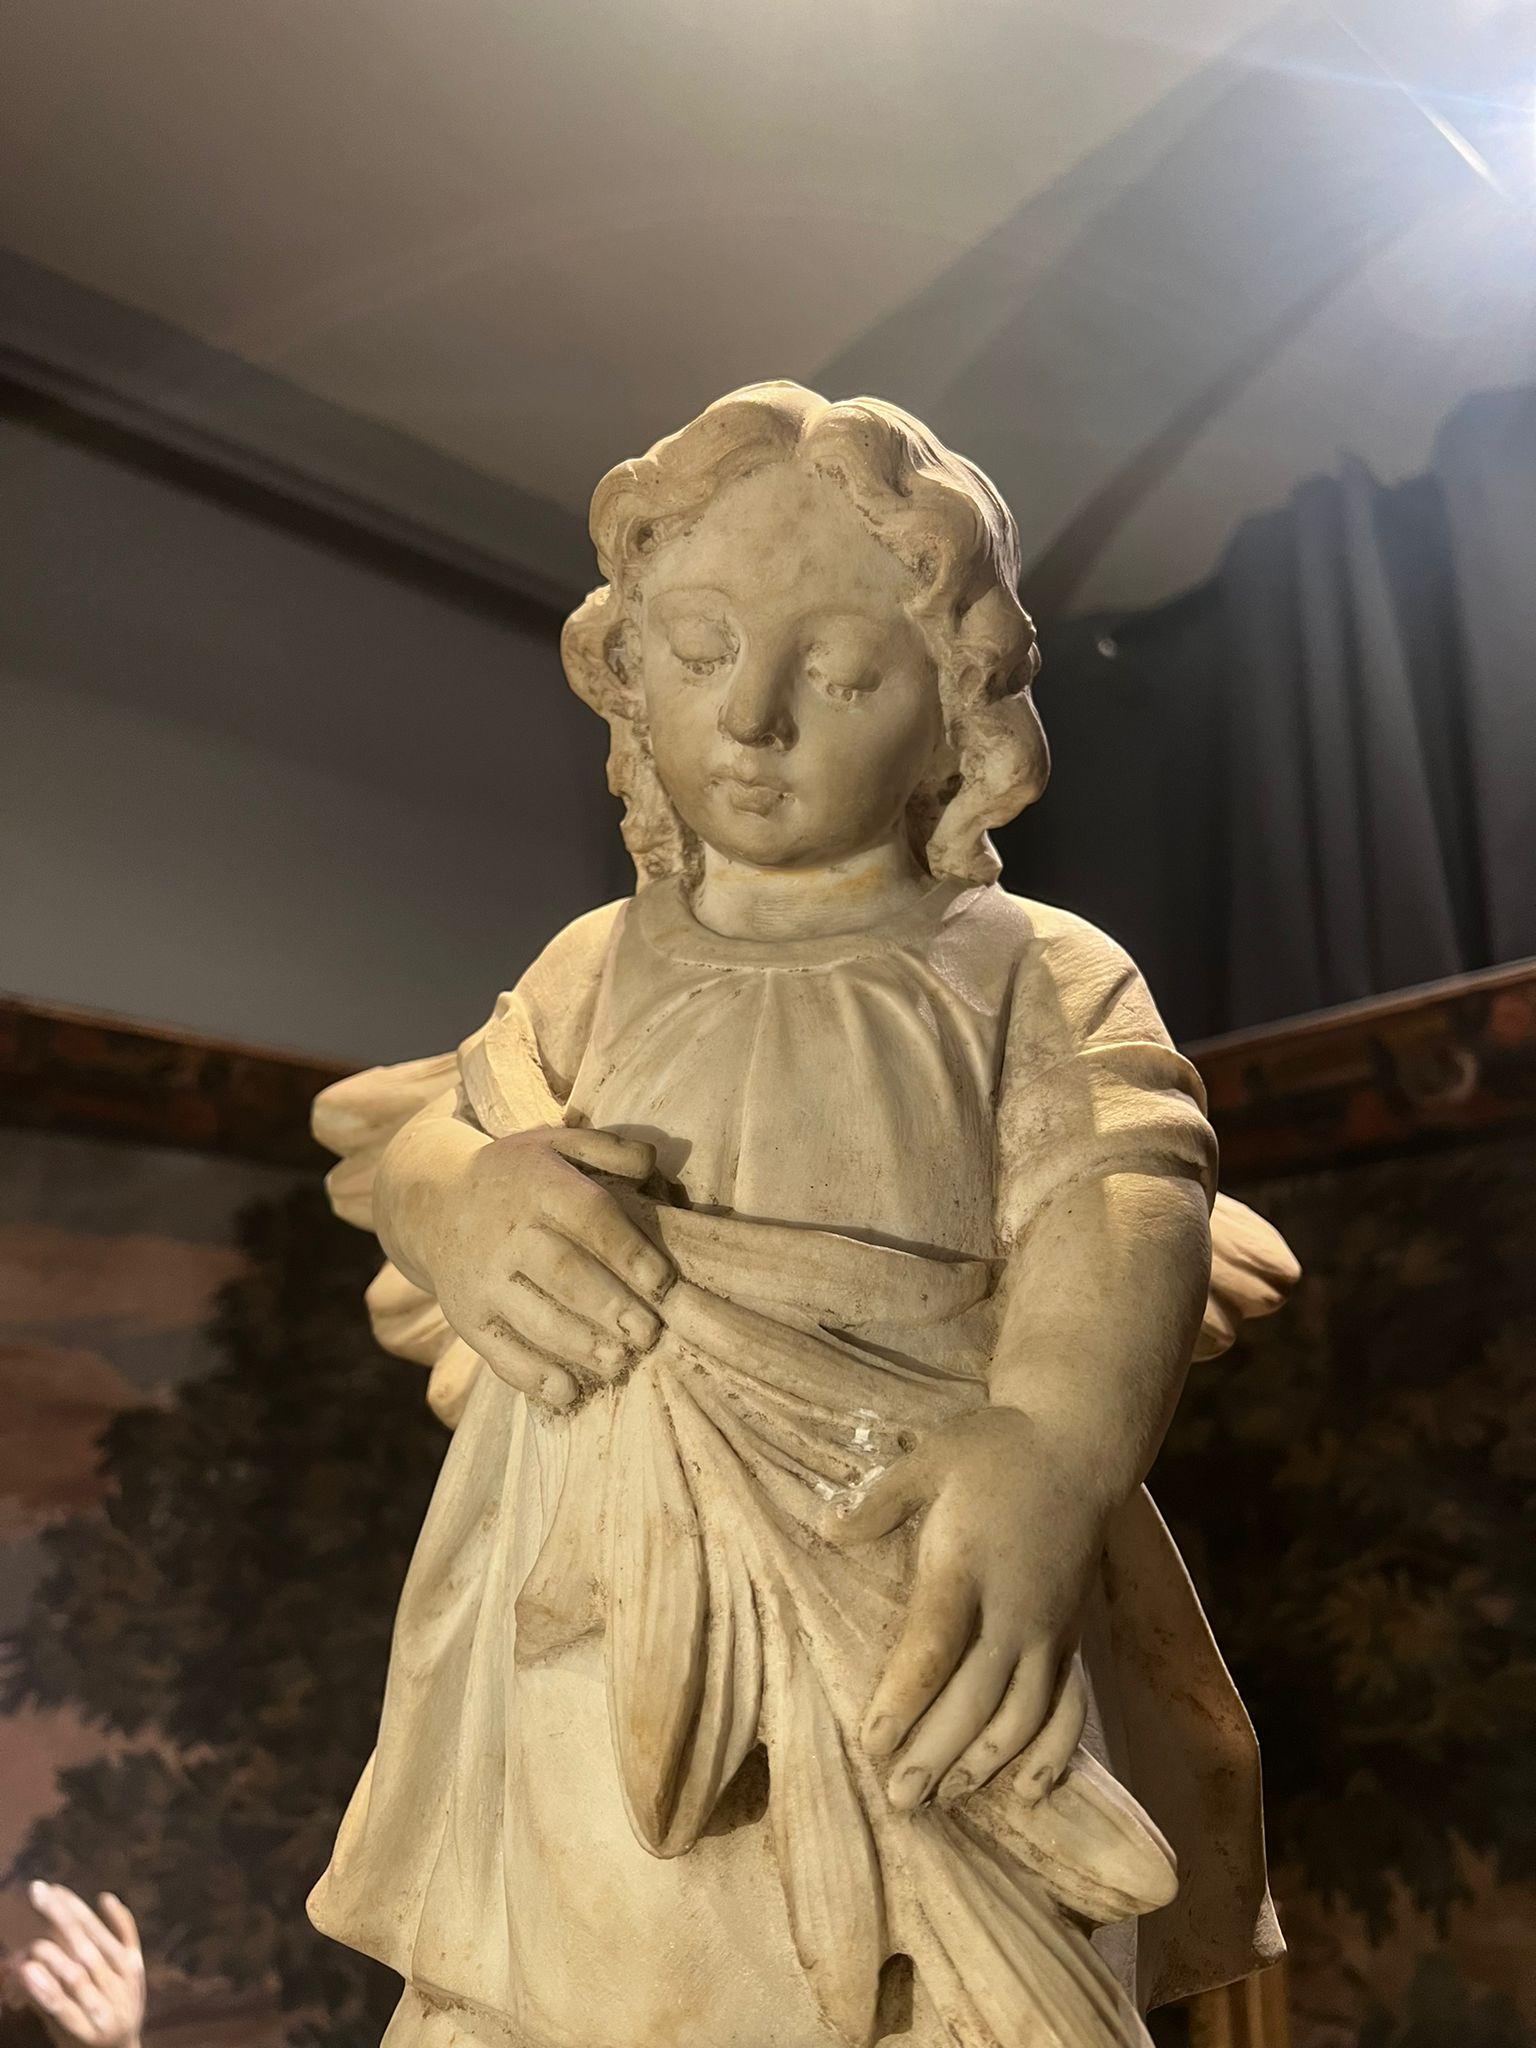 Graceful sculpture in white Carrara marble depicting a little angel with wings. Tuscany, 19th century.

Dimensions: 16x27x53 cm